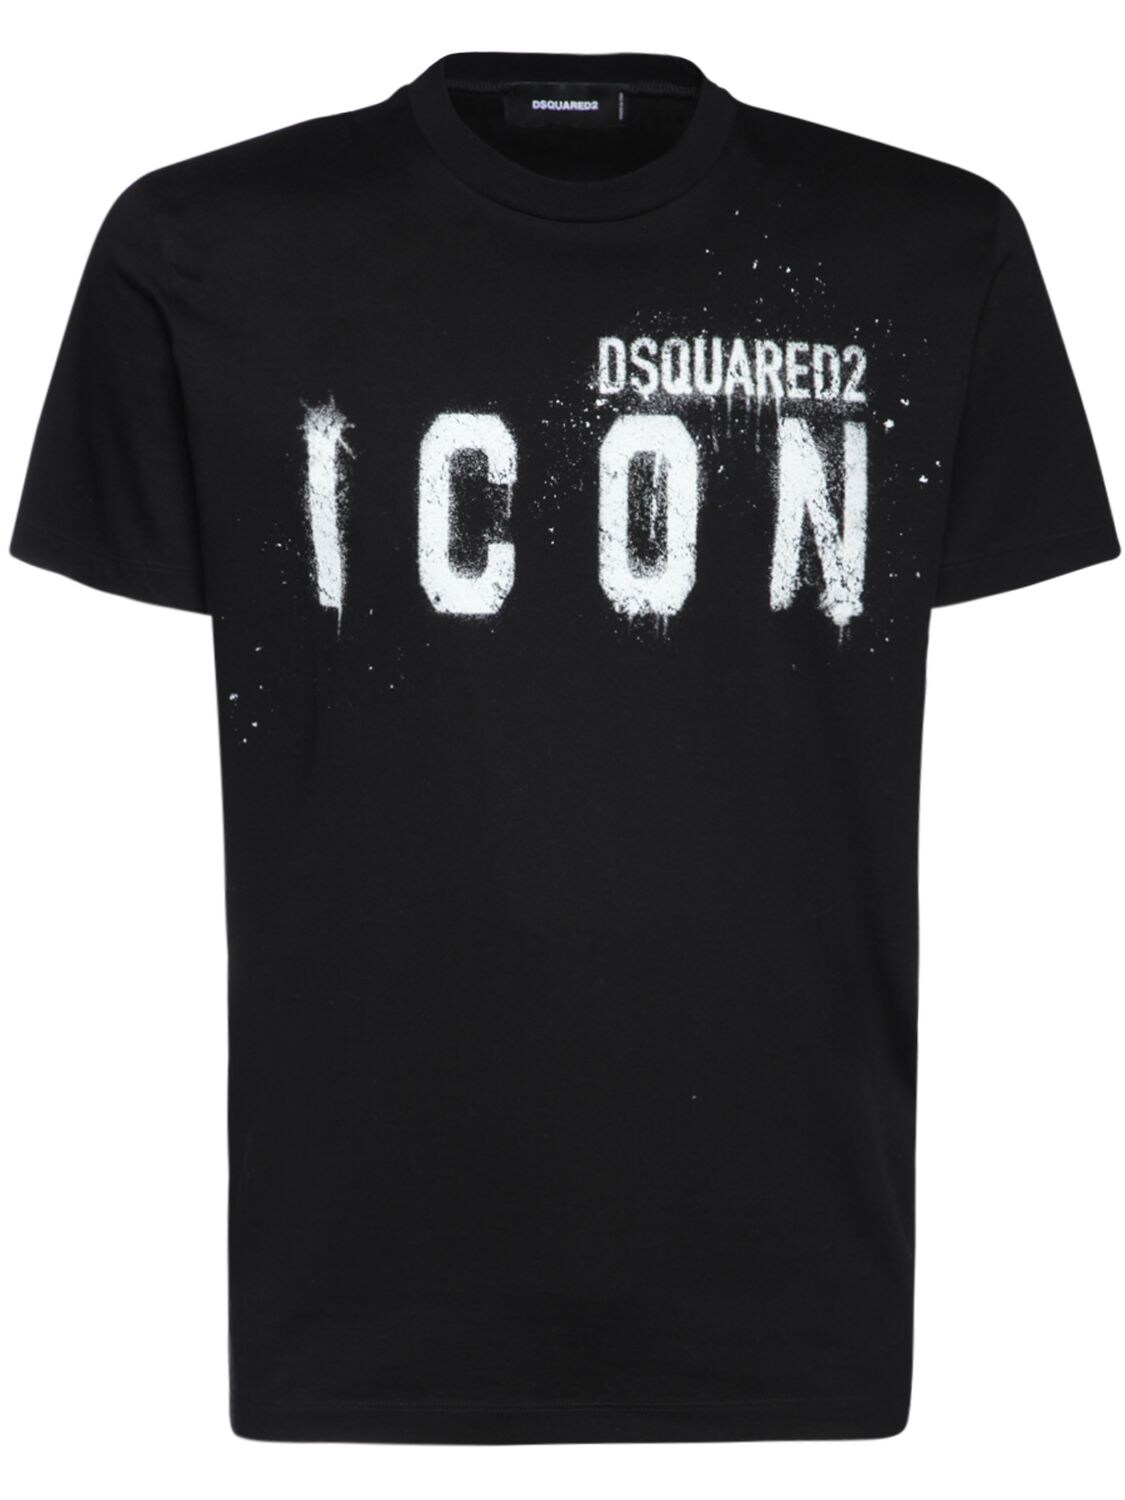 DSQUARED2 ICON SPRAY PRINTED COTTON JERSEY T-SHIRT,75IS3C010-OTAW0